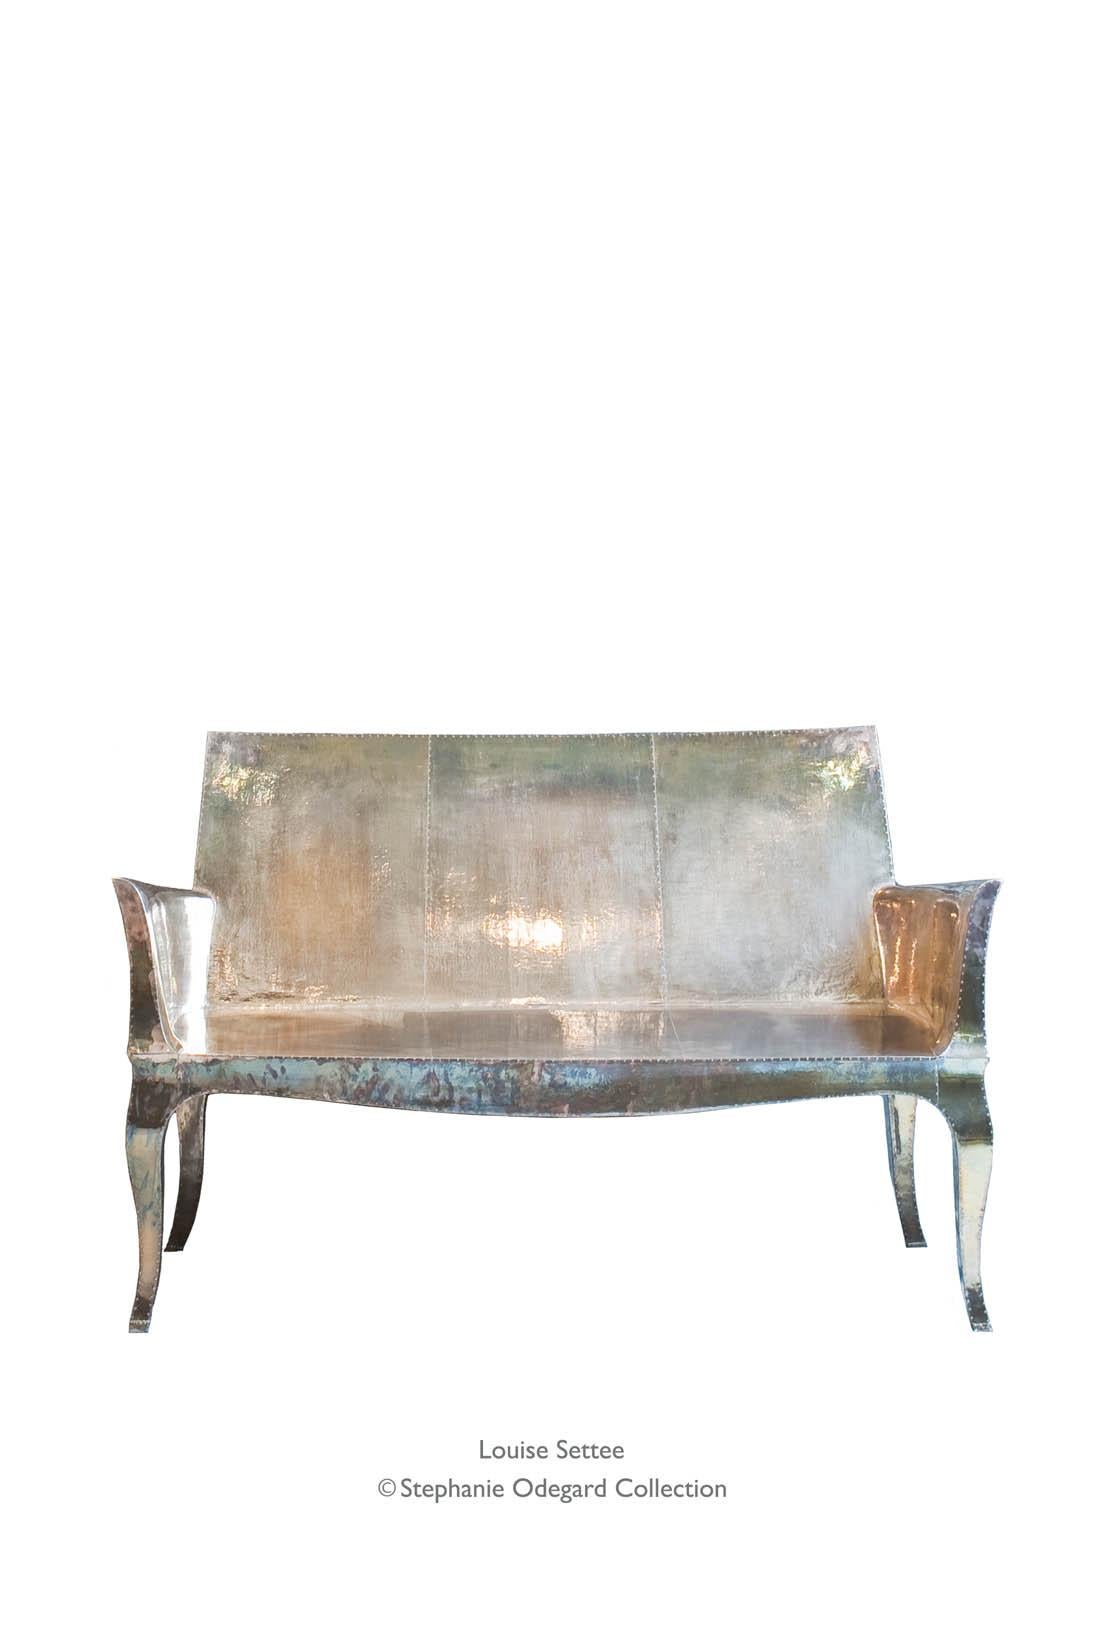 Louise Settee Art Deco Lounge Chairs in Fine Hammered Copper by Paul Mathieu For Sale 6